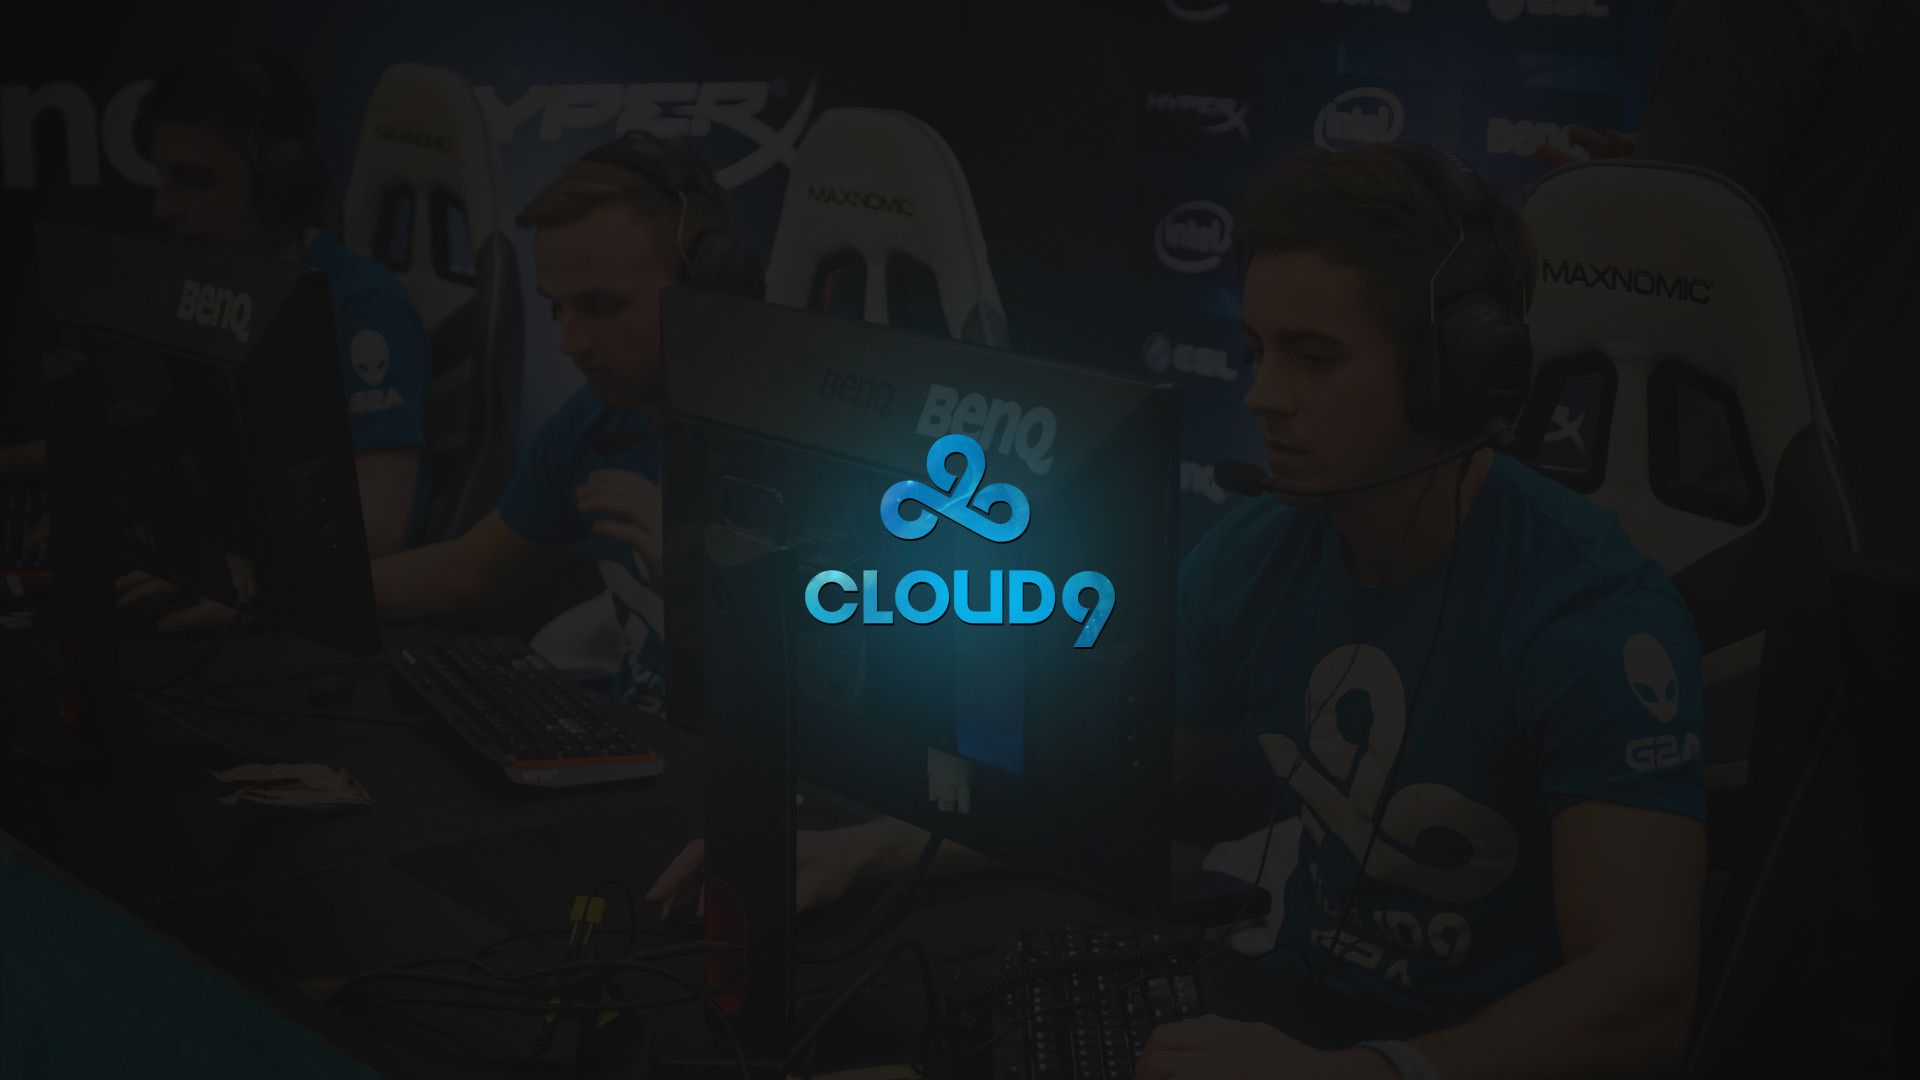 wallpapers include wallpapers of the Cloud9 CS:GO team and of the .